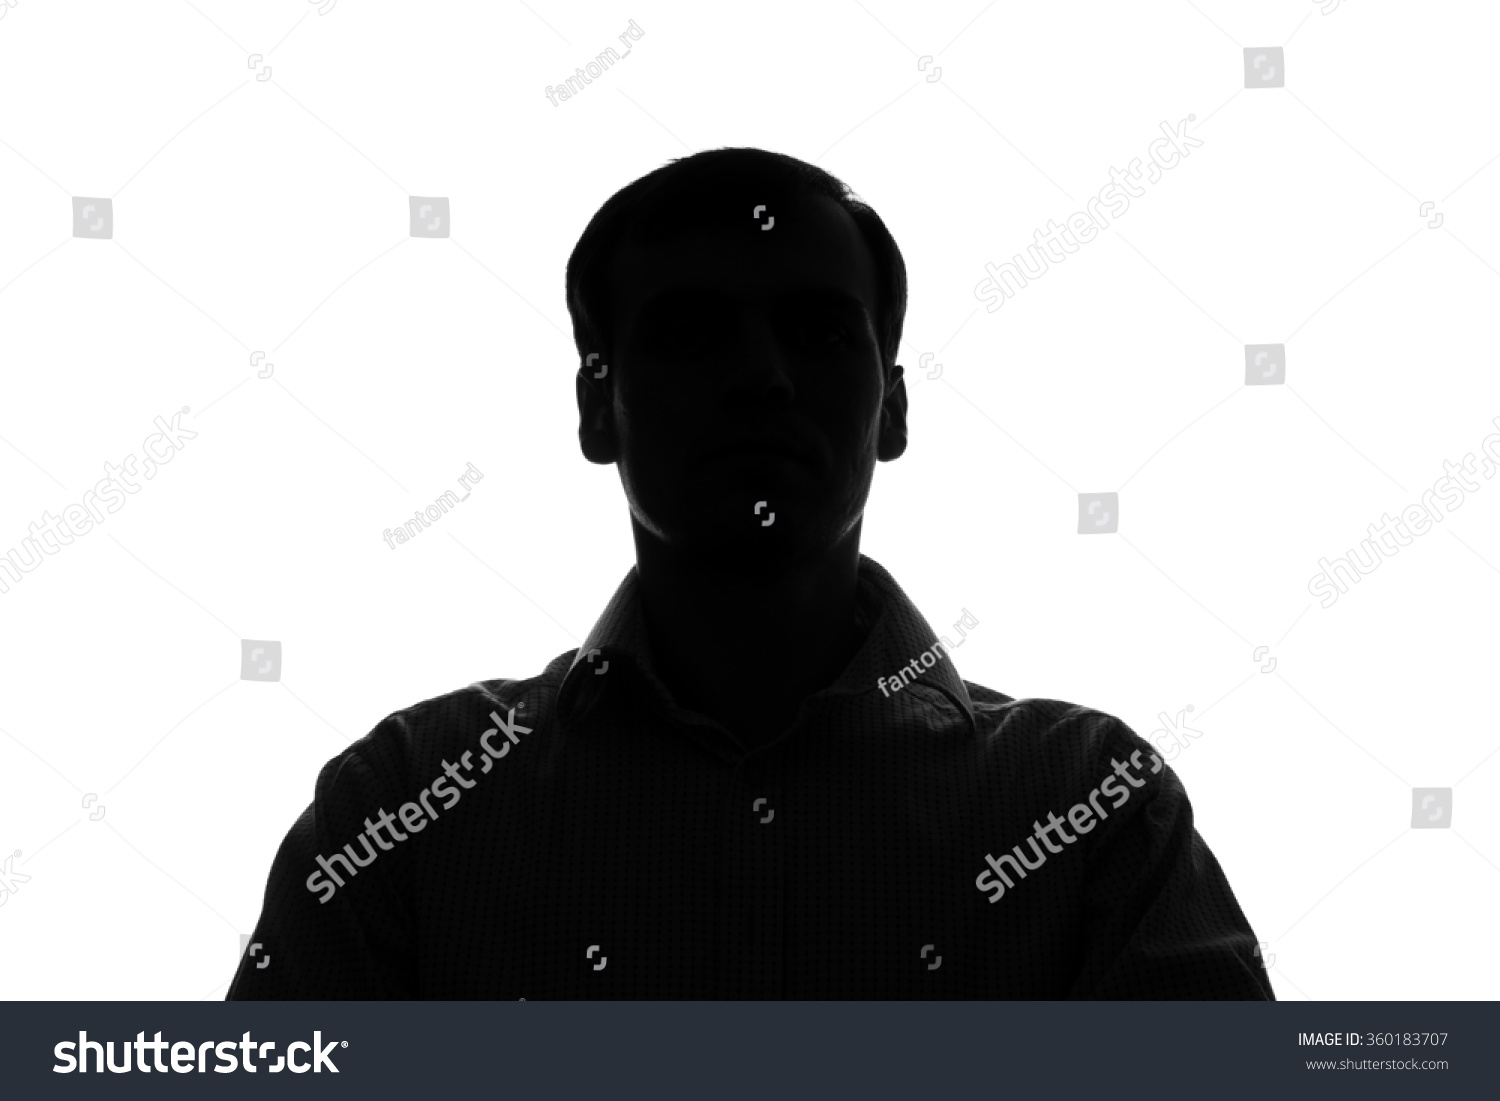 Portrait of a young man in front view - silhouette #360183707